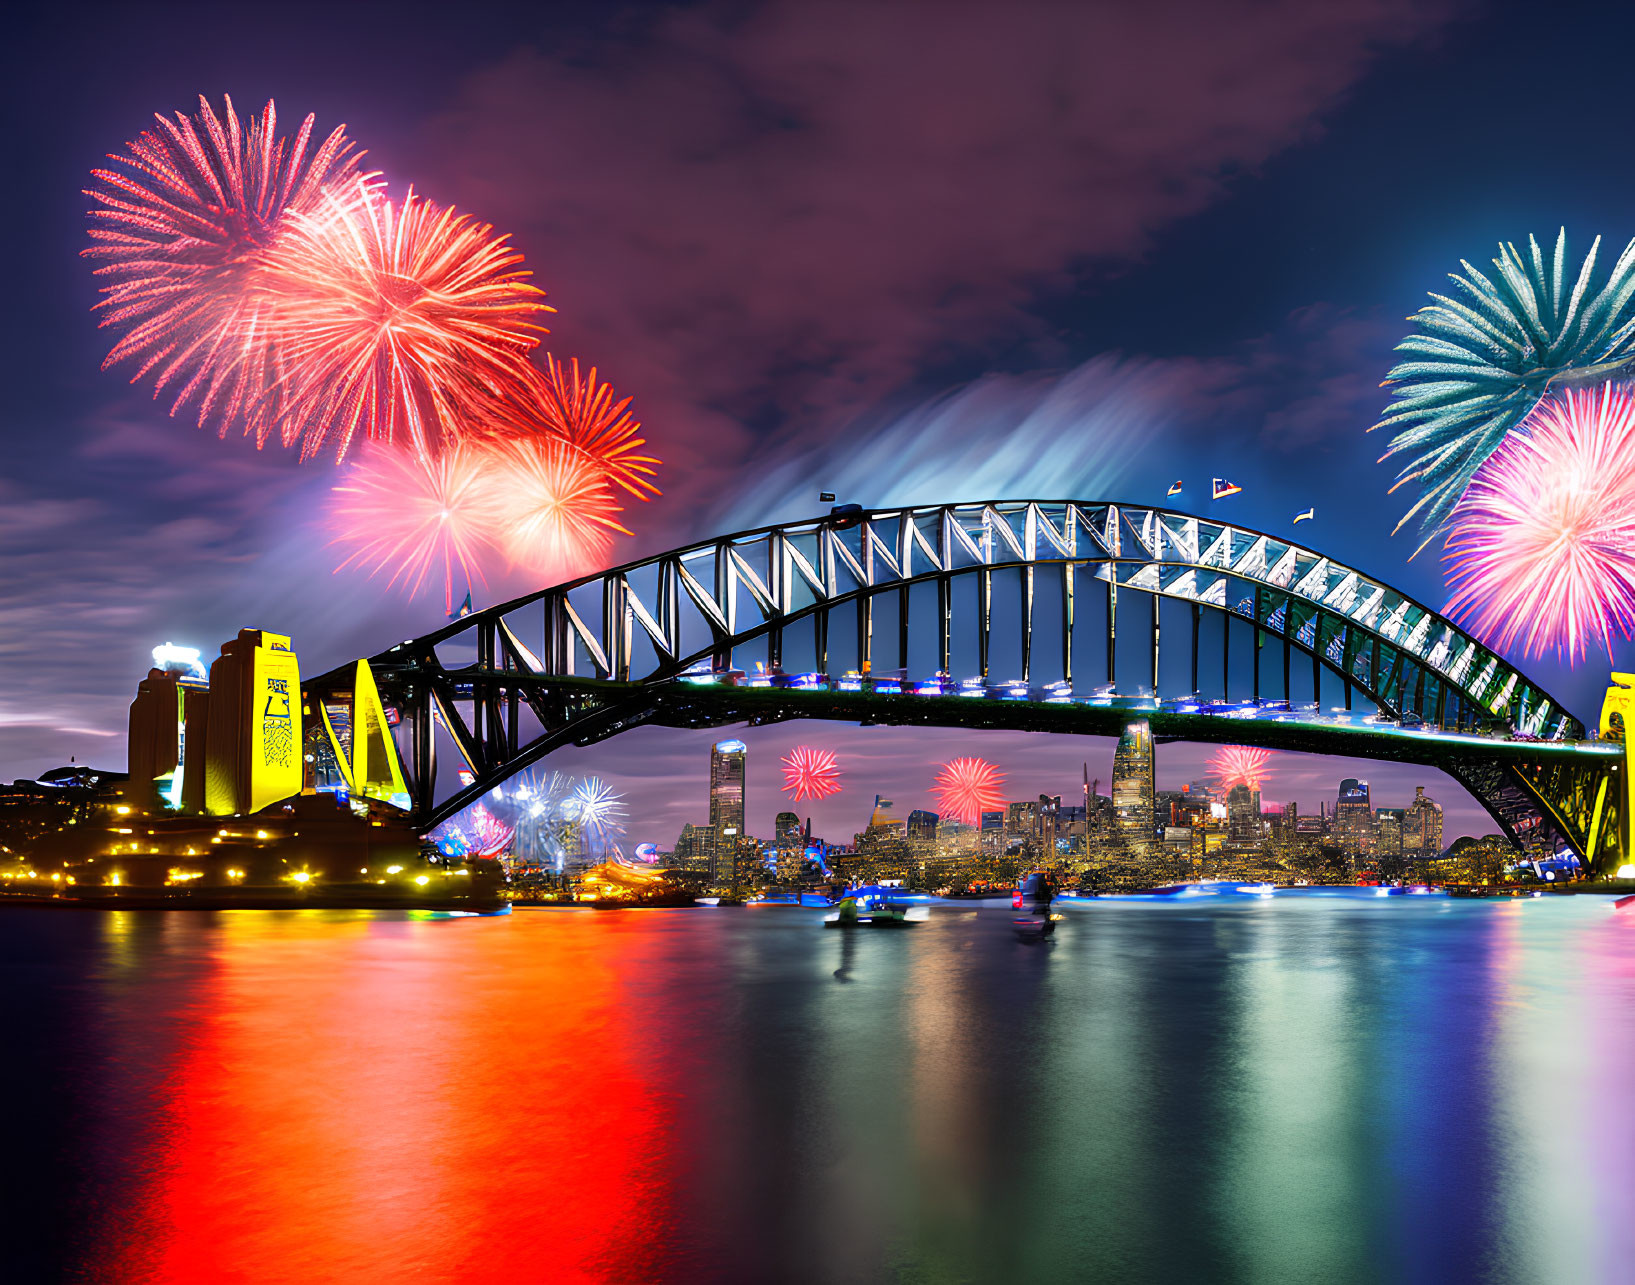 Colorful fireworks over Sydney Harbour Bridge at night with city skyline and water reflection